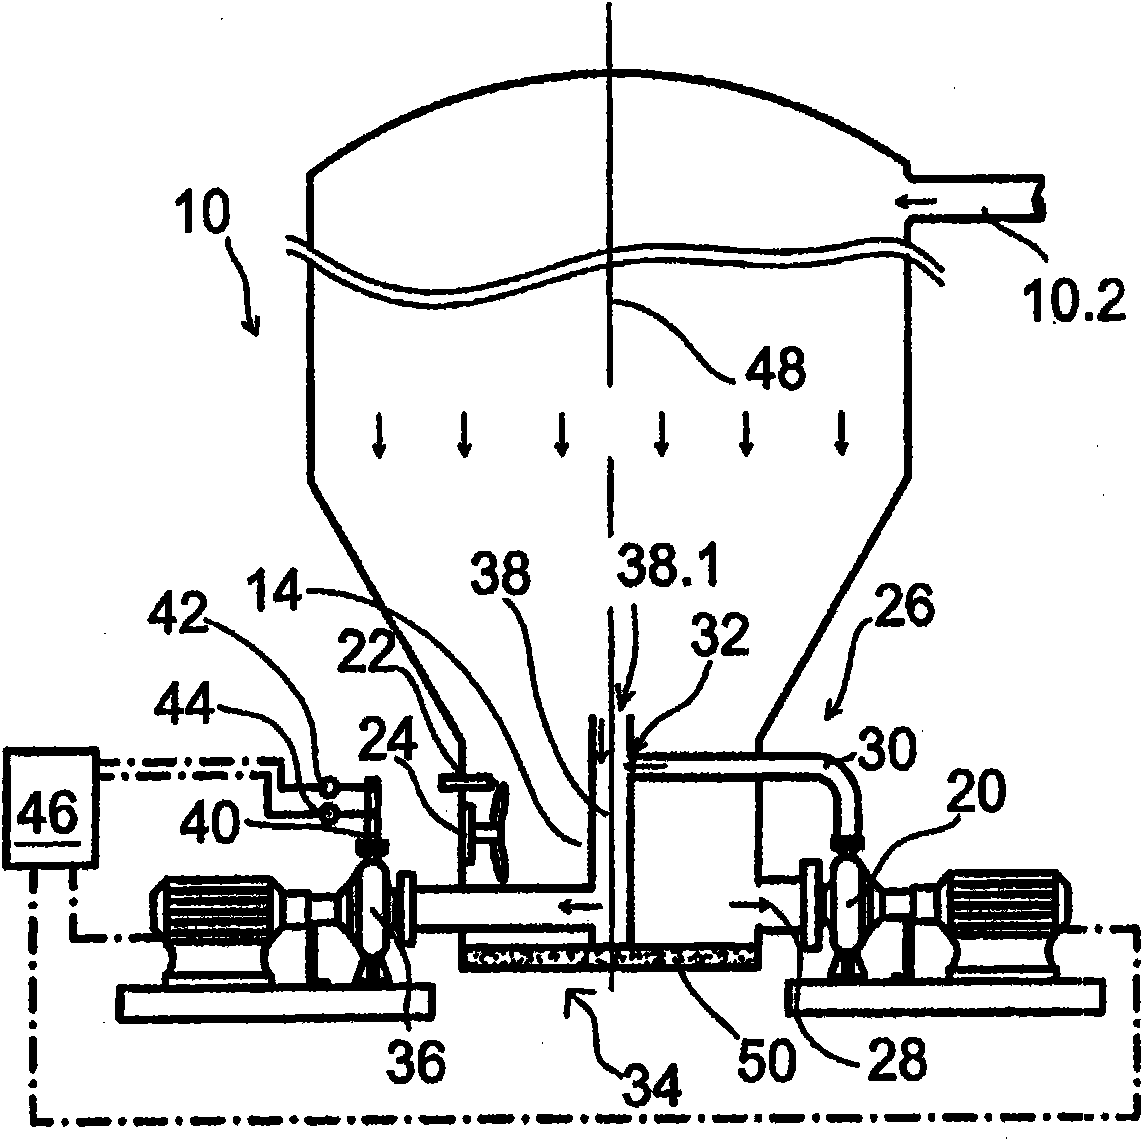 An apparatus for discharging pulp from a vessel, method of discharging pulp form a vessel and method of upgrading a pulp vessel